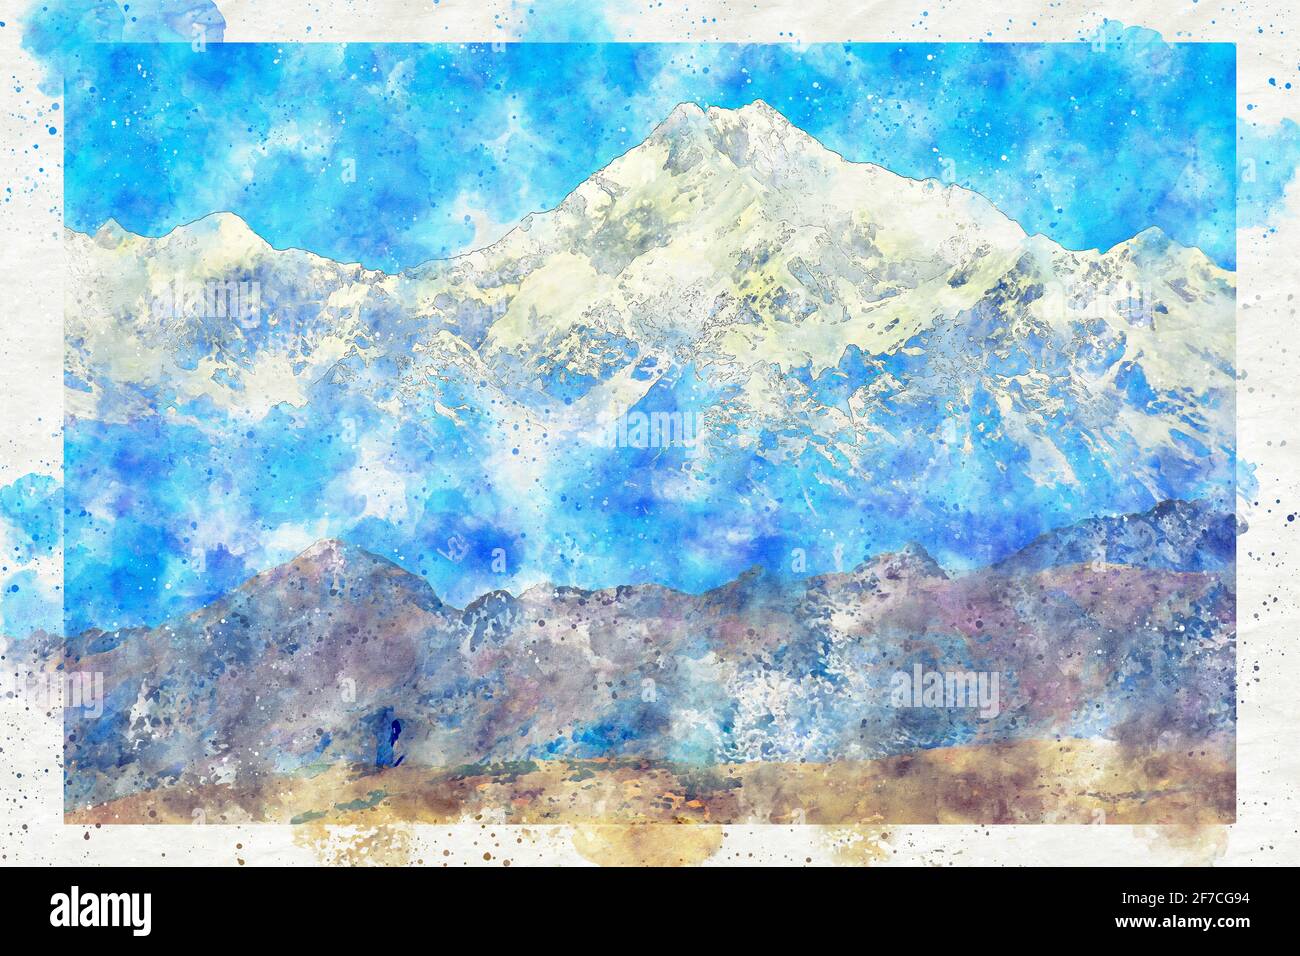 Majestic view of mount Kanchenjunga from Sikkim, digitaly painted in watercolor Stock Photo